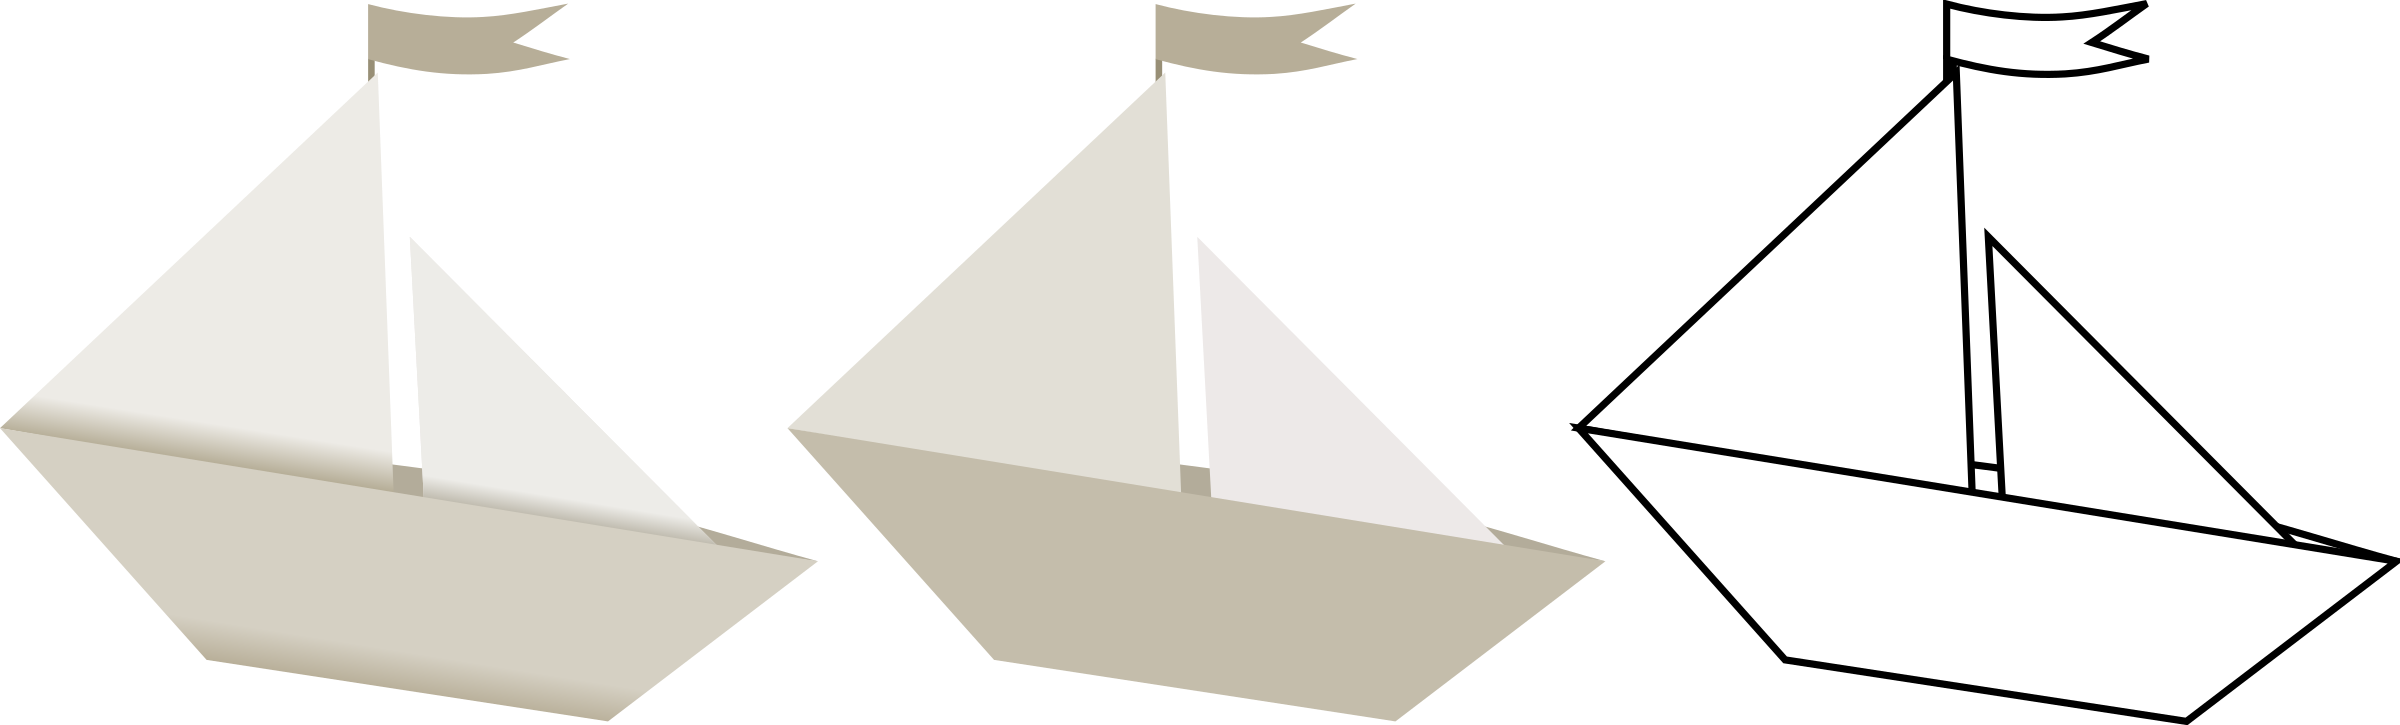 paper boat clipart - photo #18